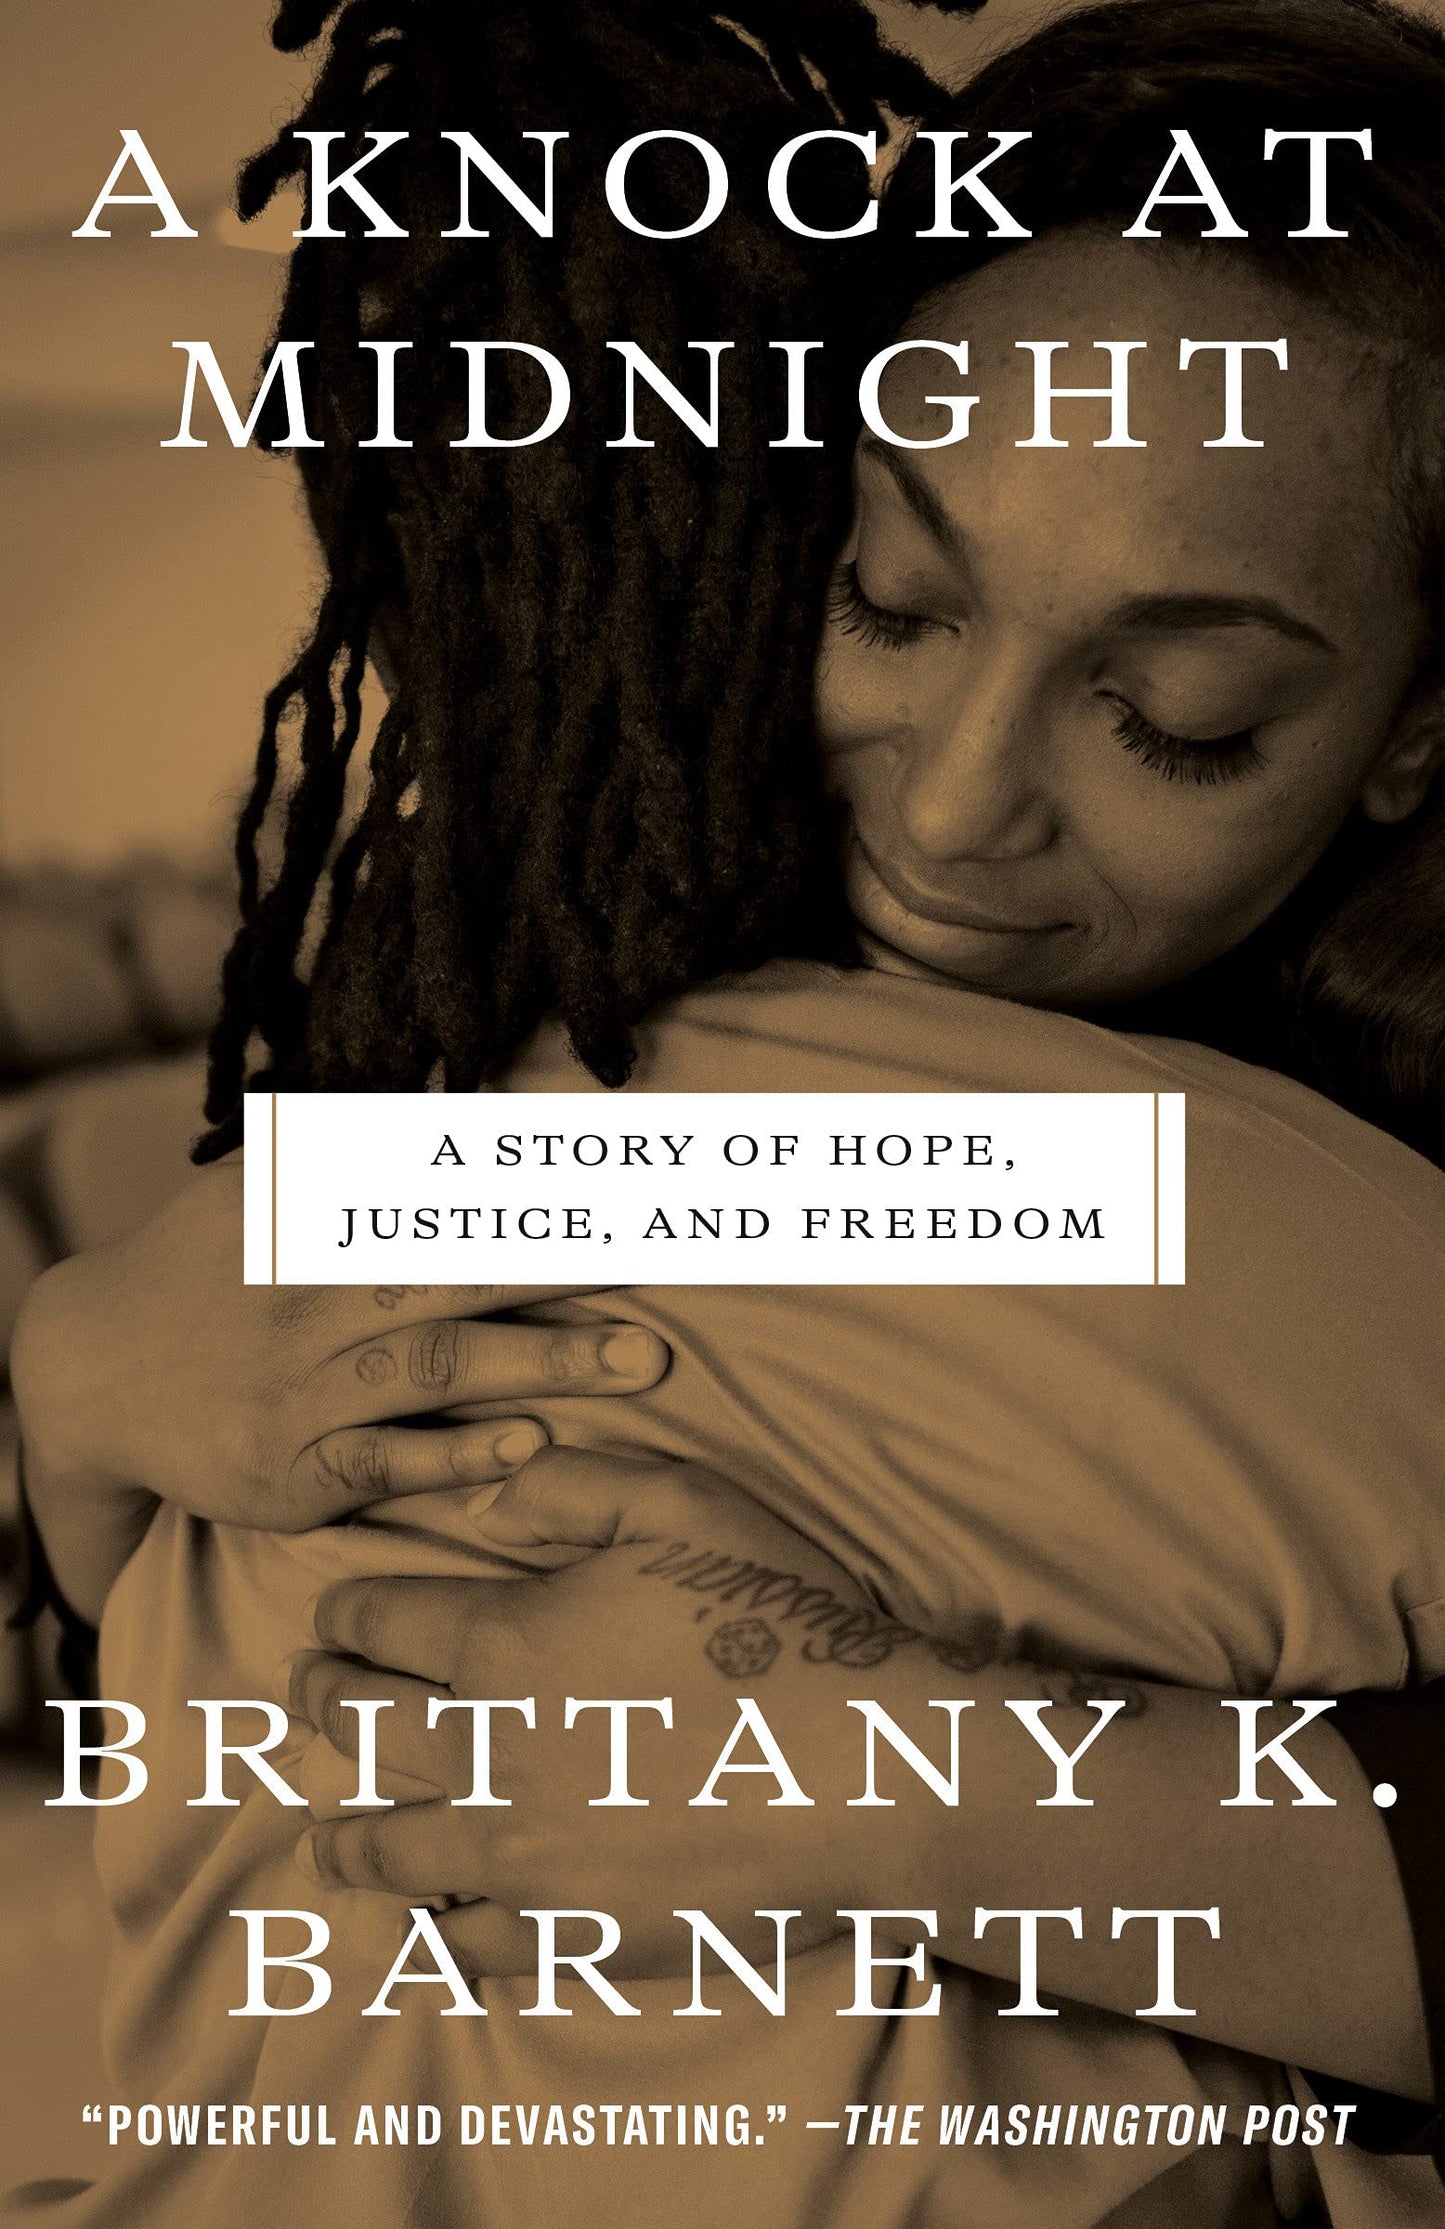 A Knock at Midnight // A Story of Hope, Justice, and Freedom